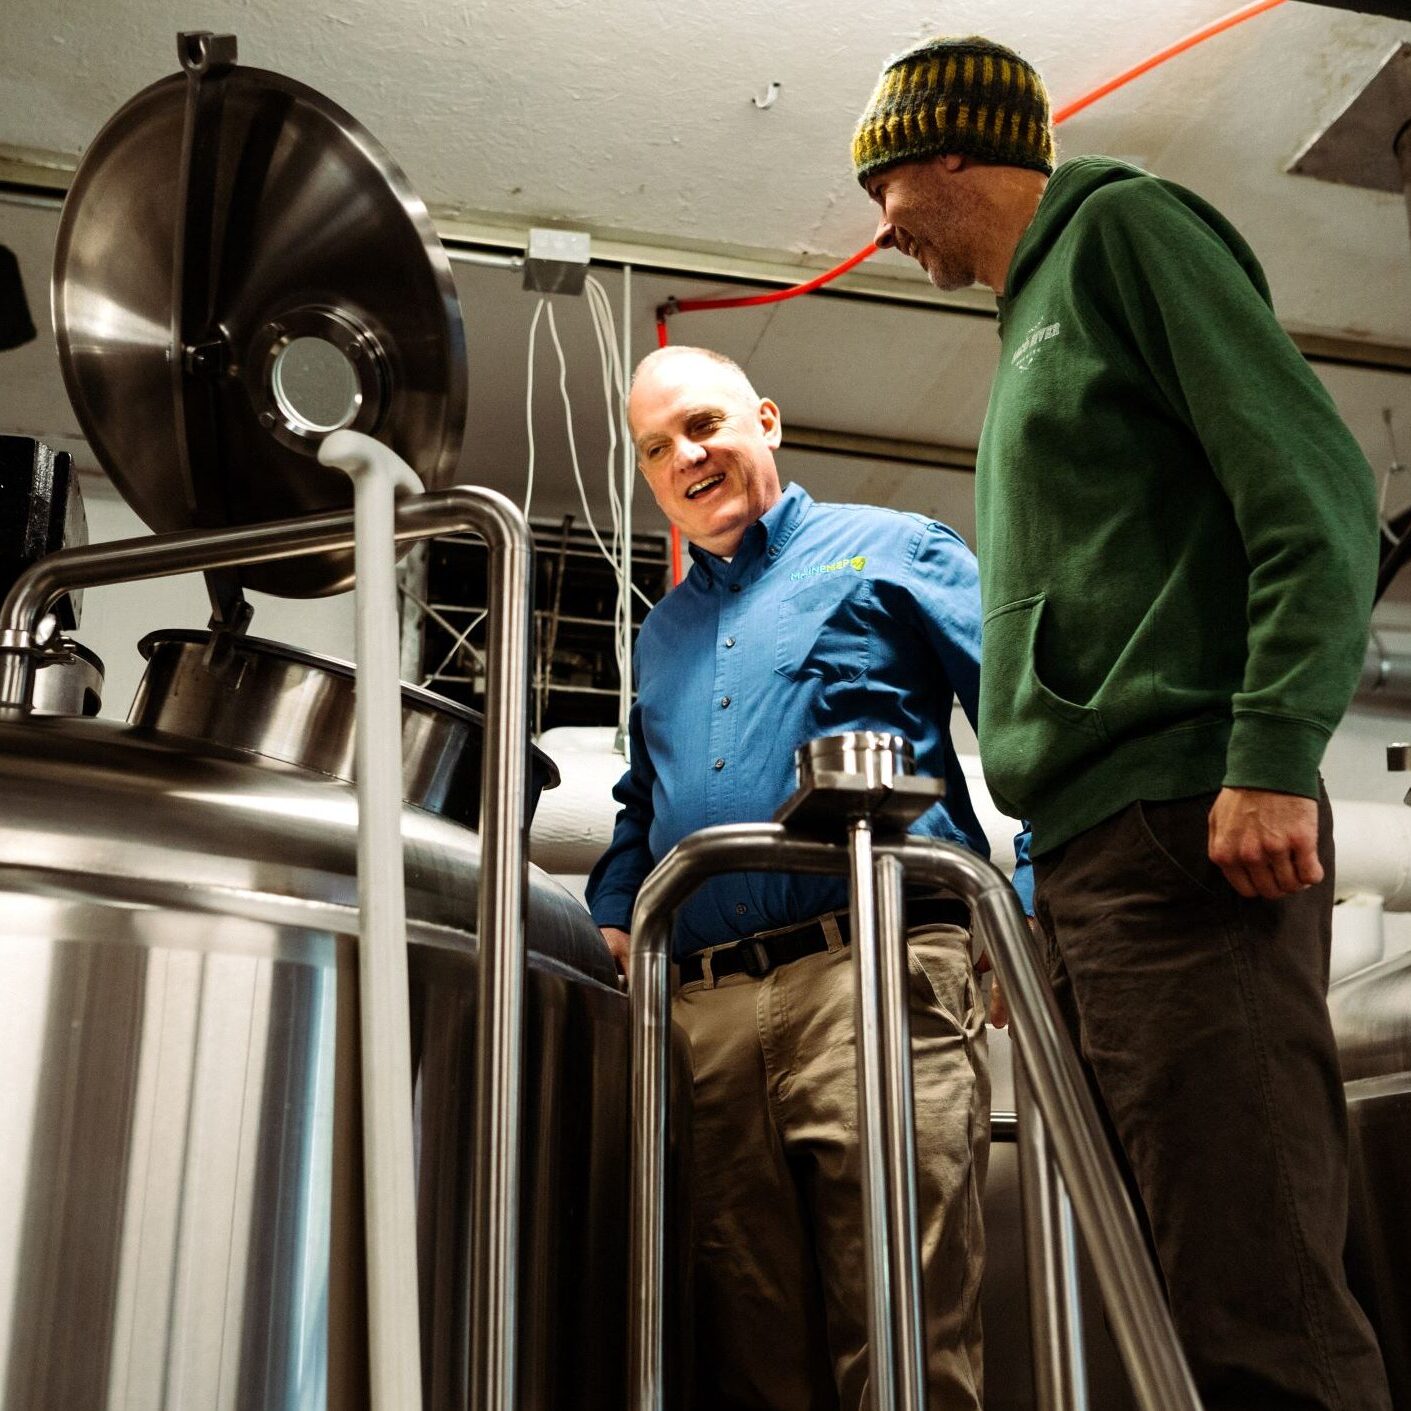 Maine MEP project manager stands in a brewery with business owner looking at each other and laughing.